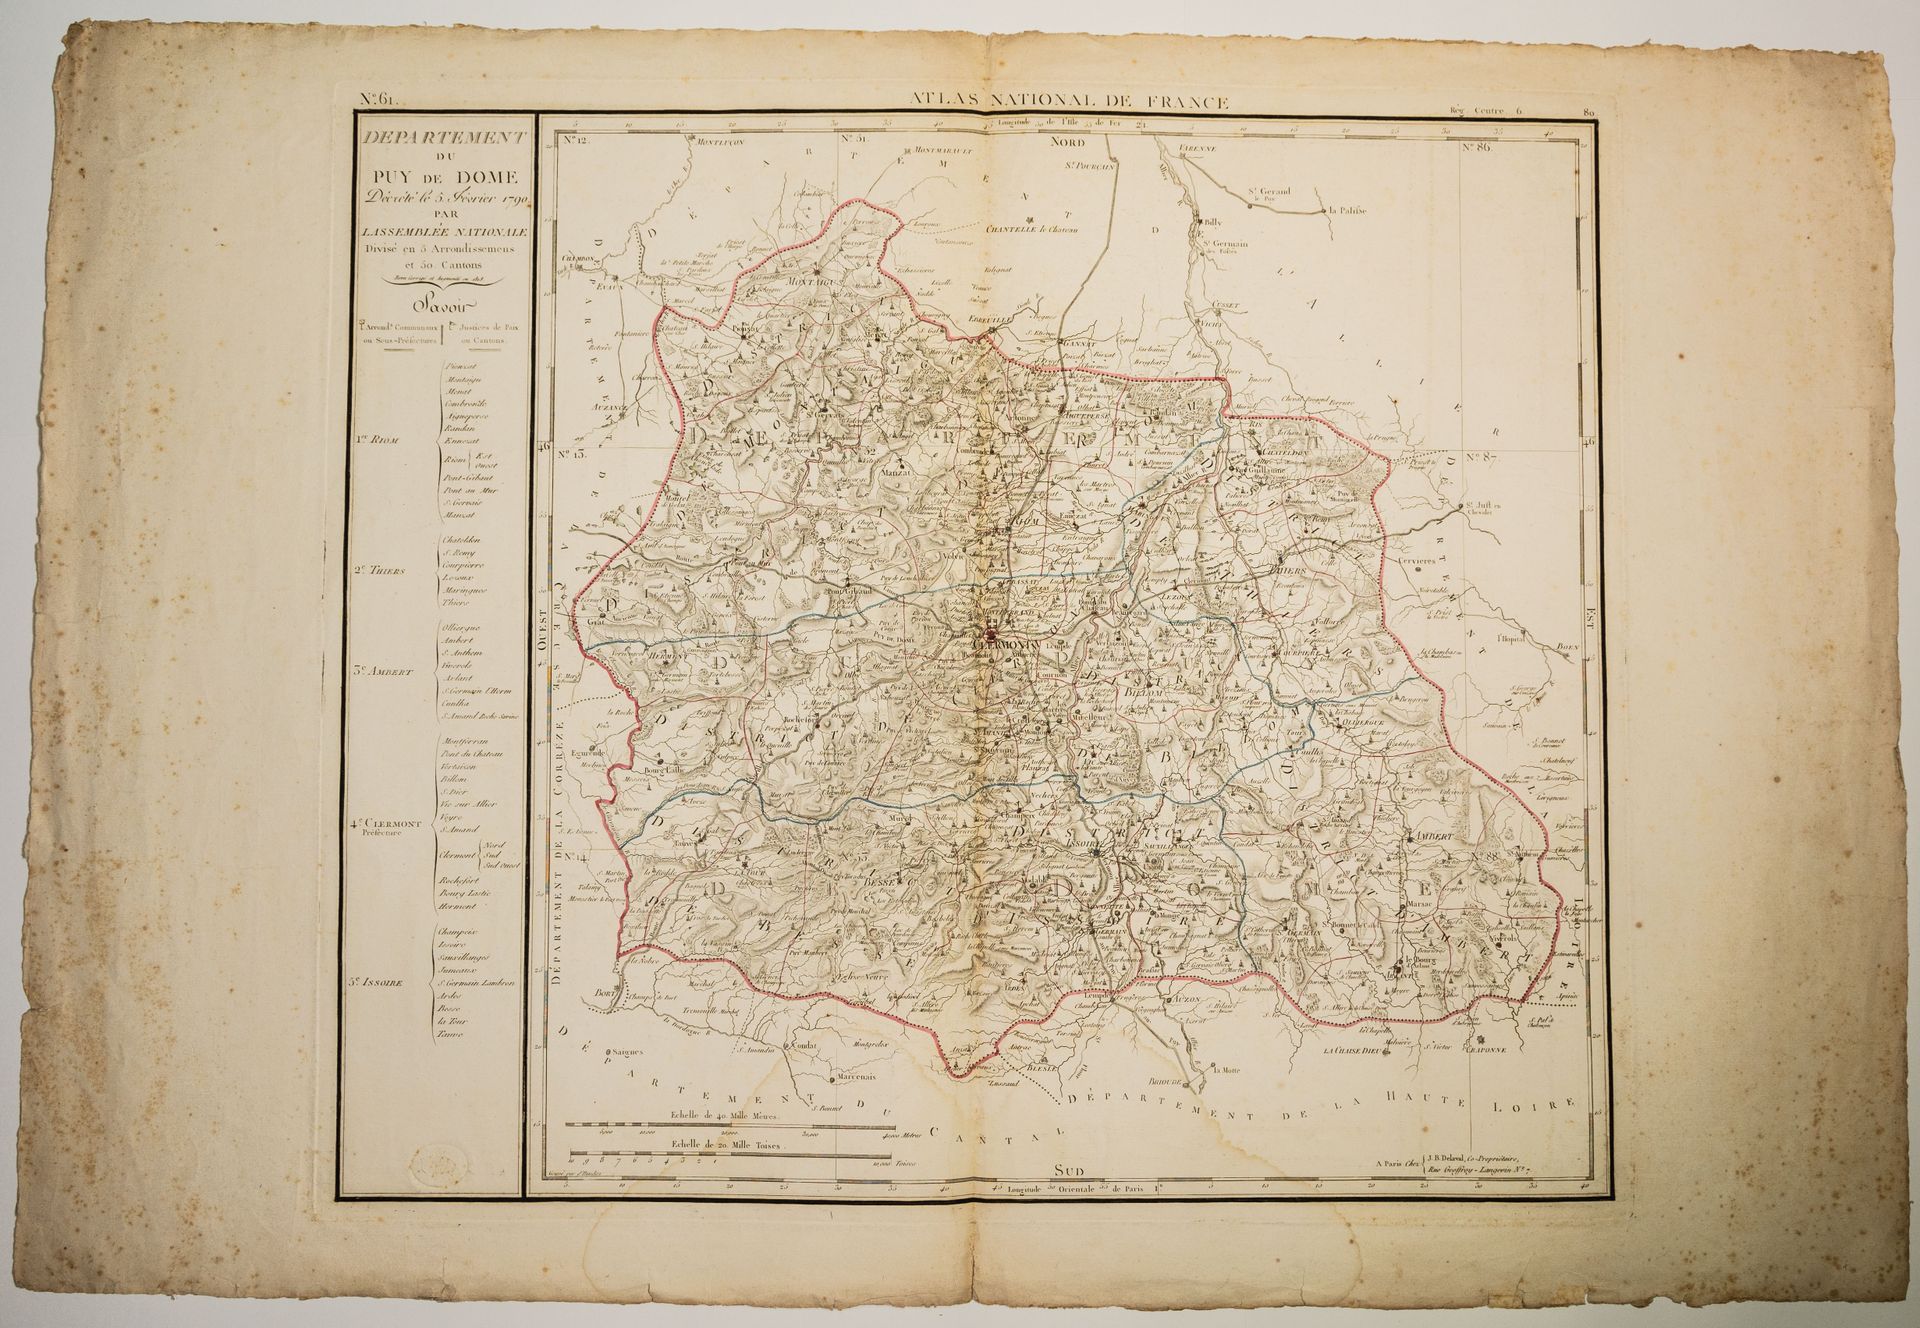 Null 93 - Map " Department of the PUY-DE-DÔME decreed on February 5, 1790 by the&hellip;